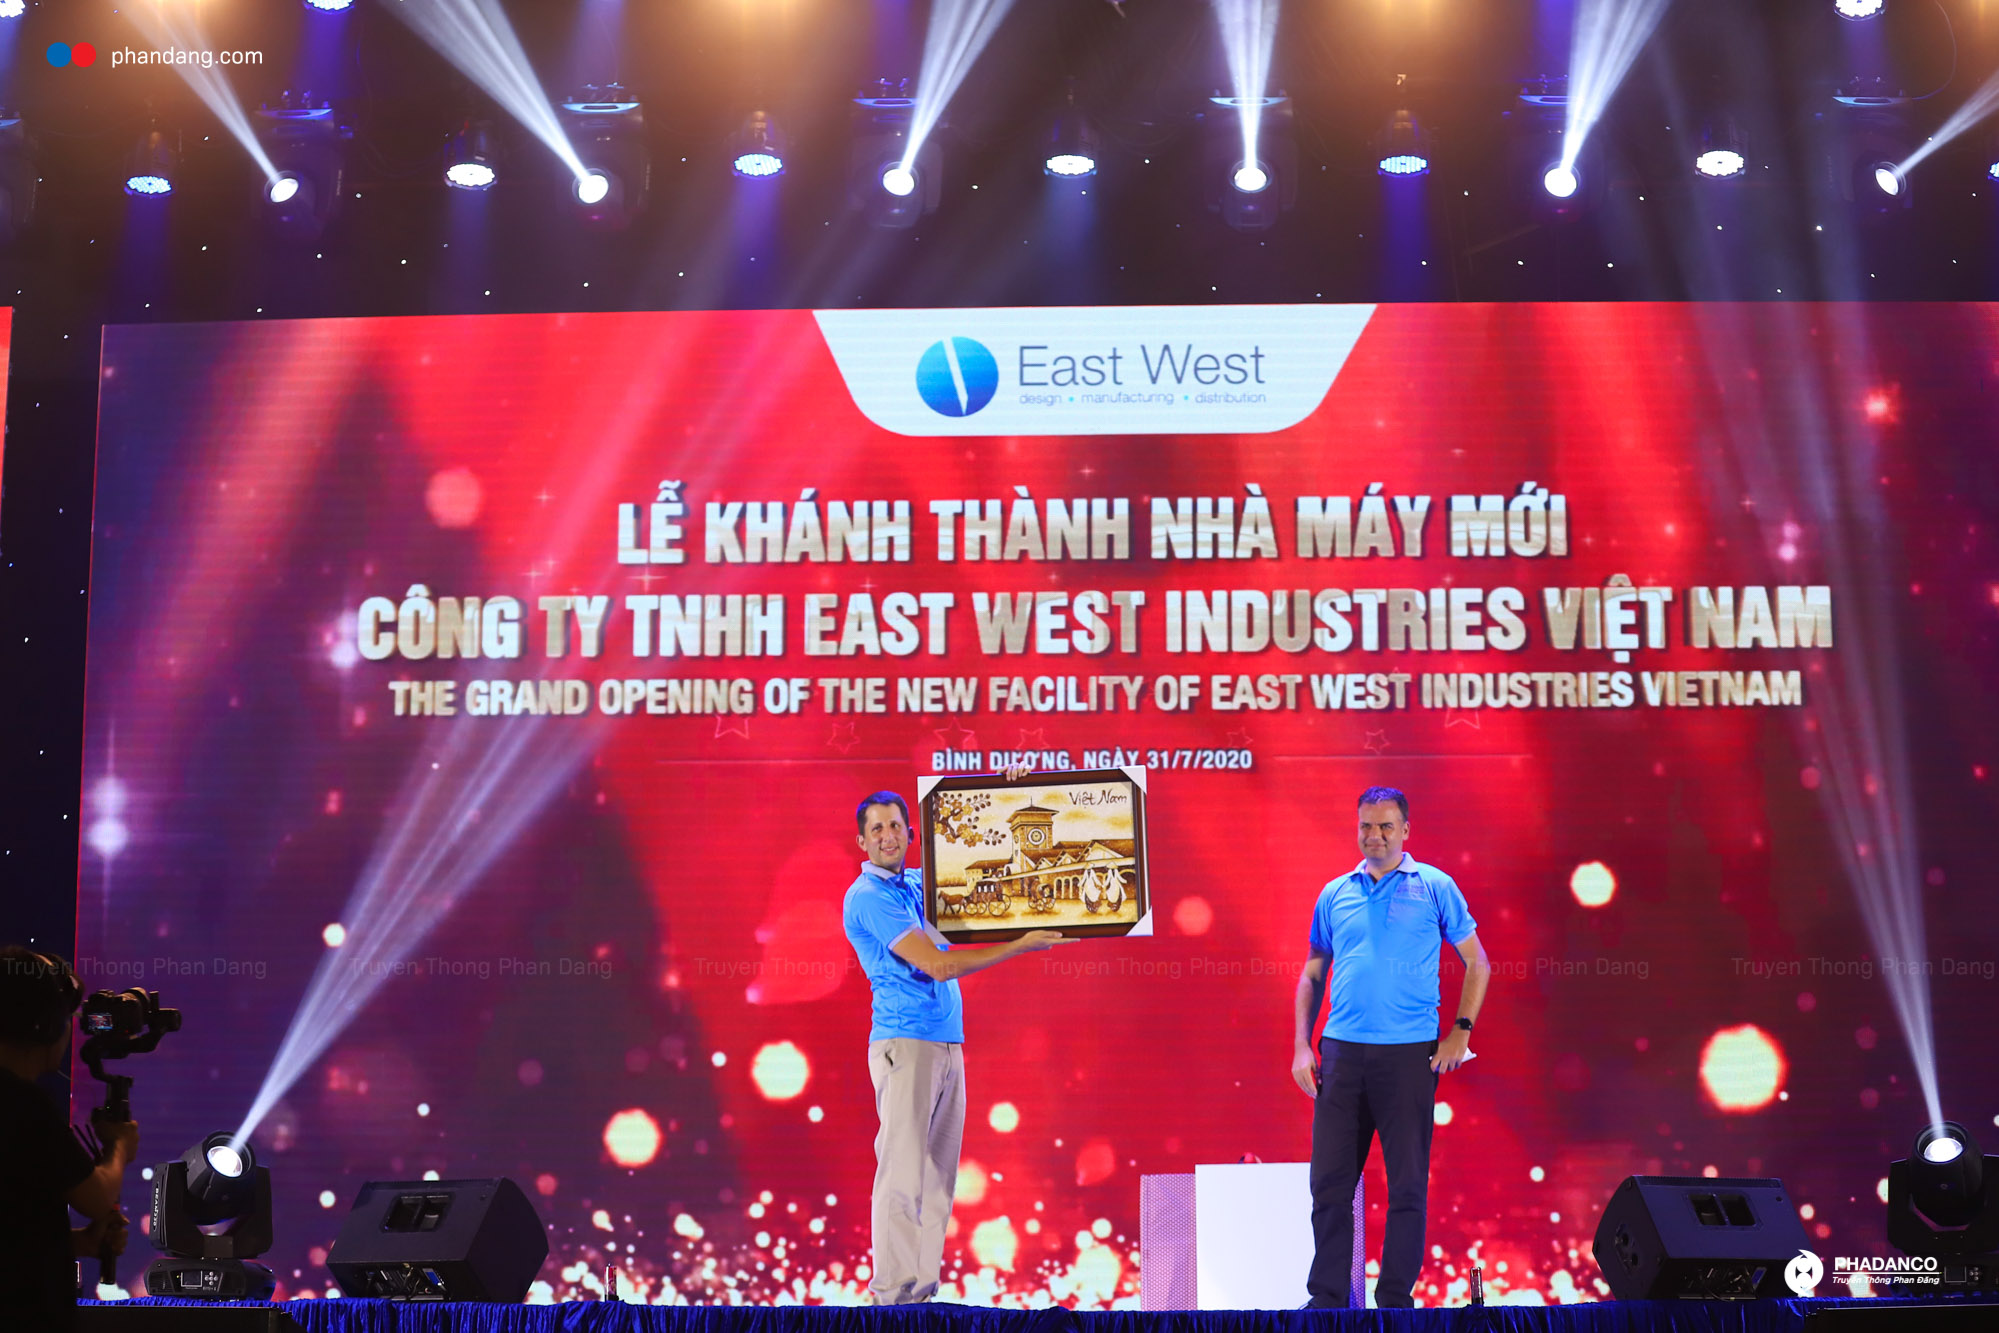 le khanh thanh nha may east west industries 10